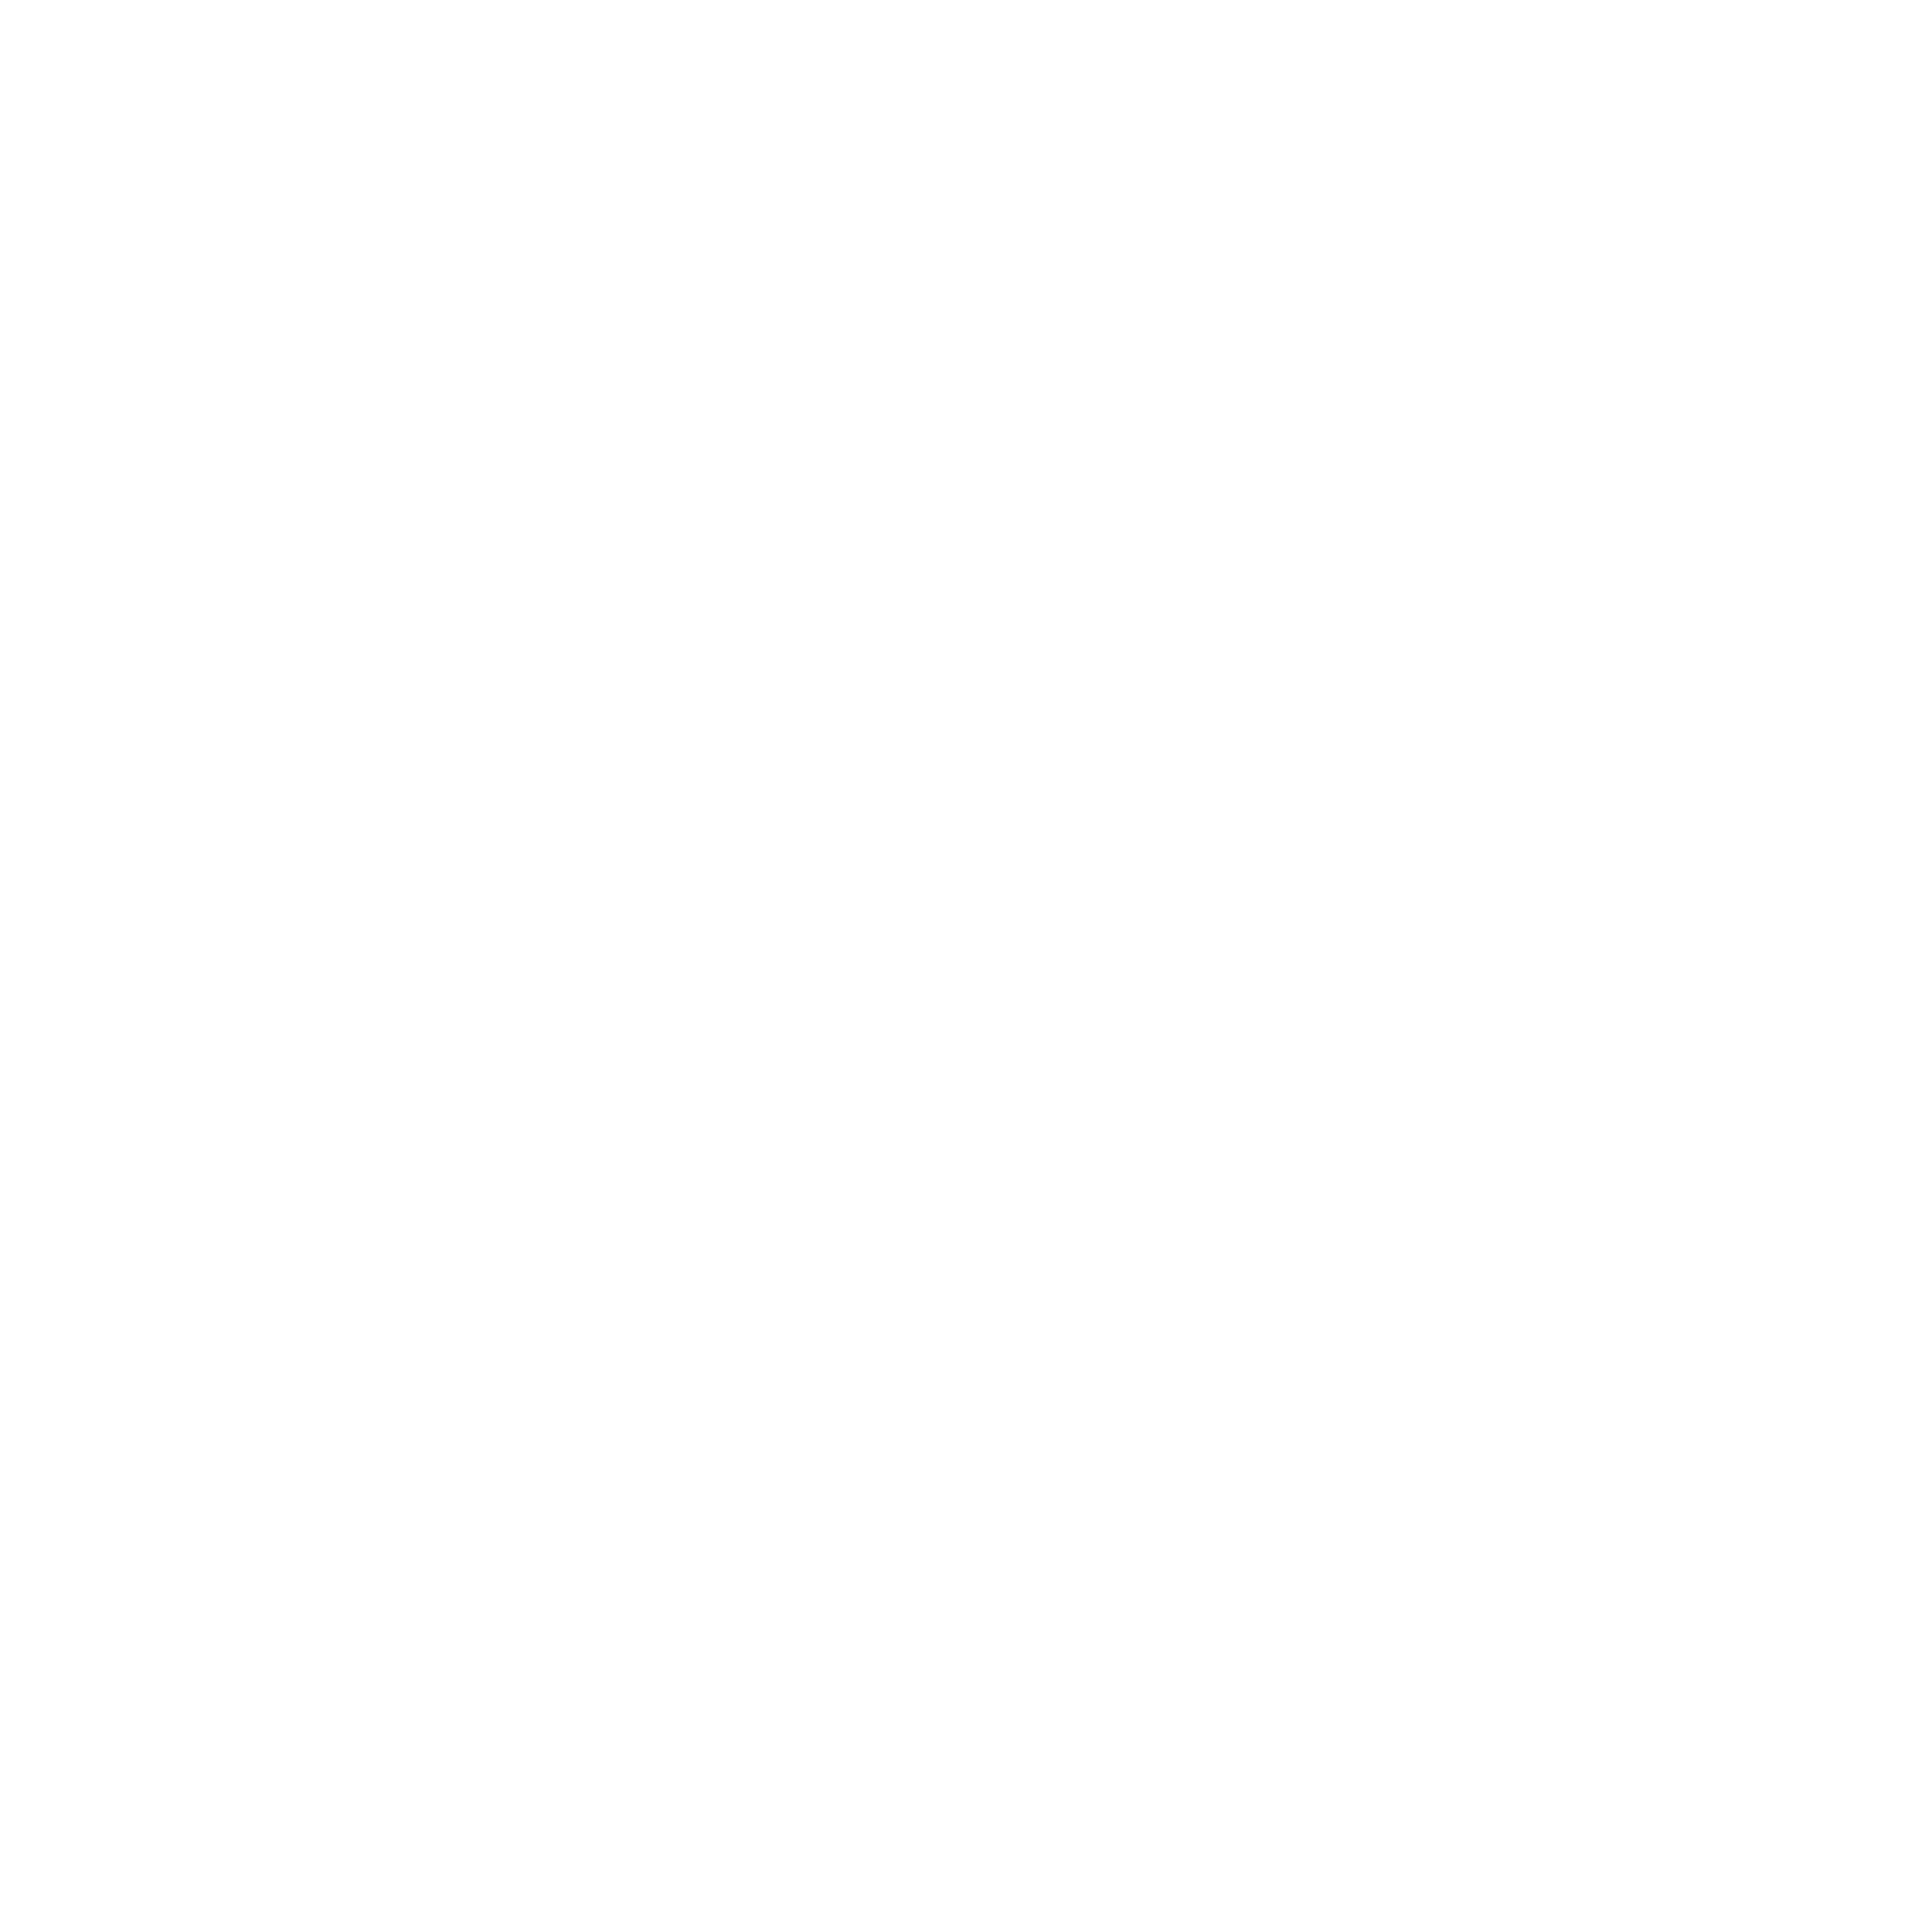 CTS LOGO 1 WHITE.png